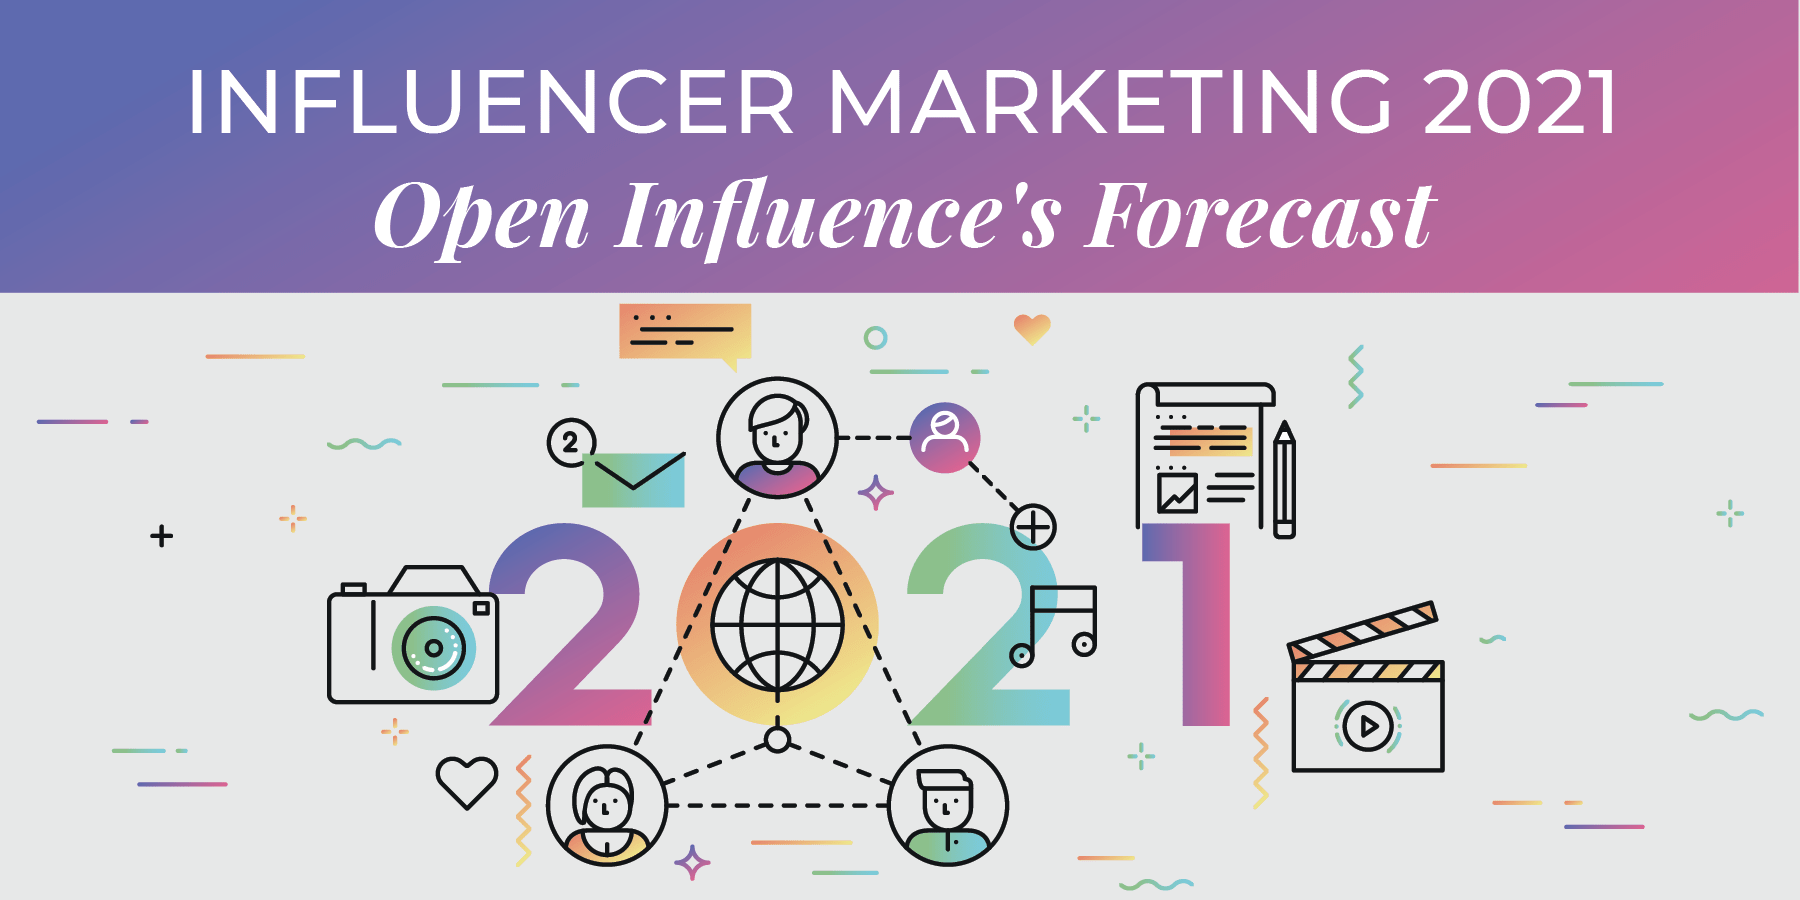 An Influencer Marketing Agency’s Annual Update: Oh-My Forecast With A Chance Of Wow